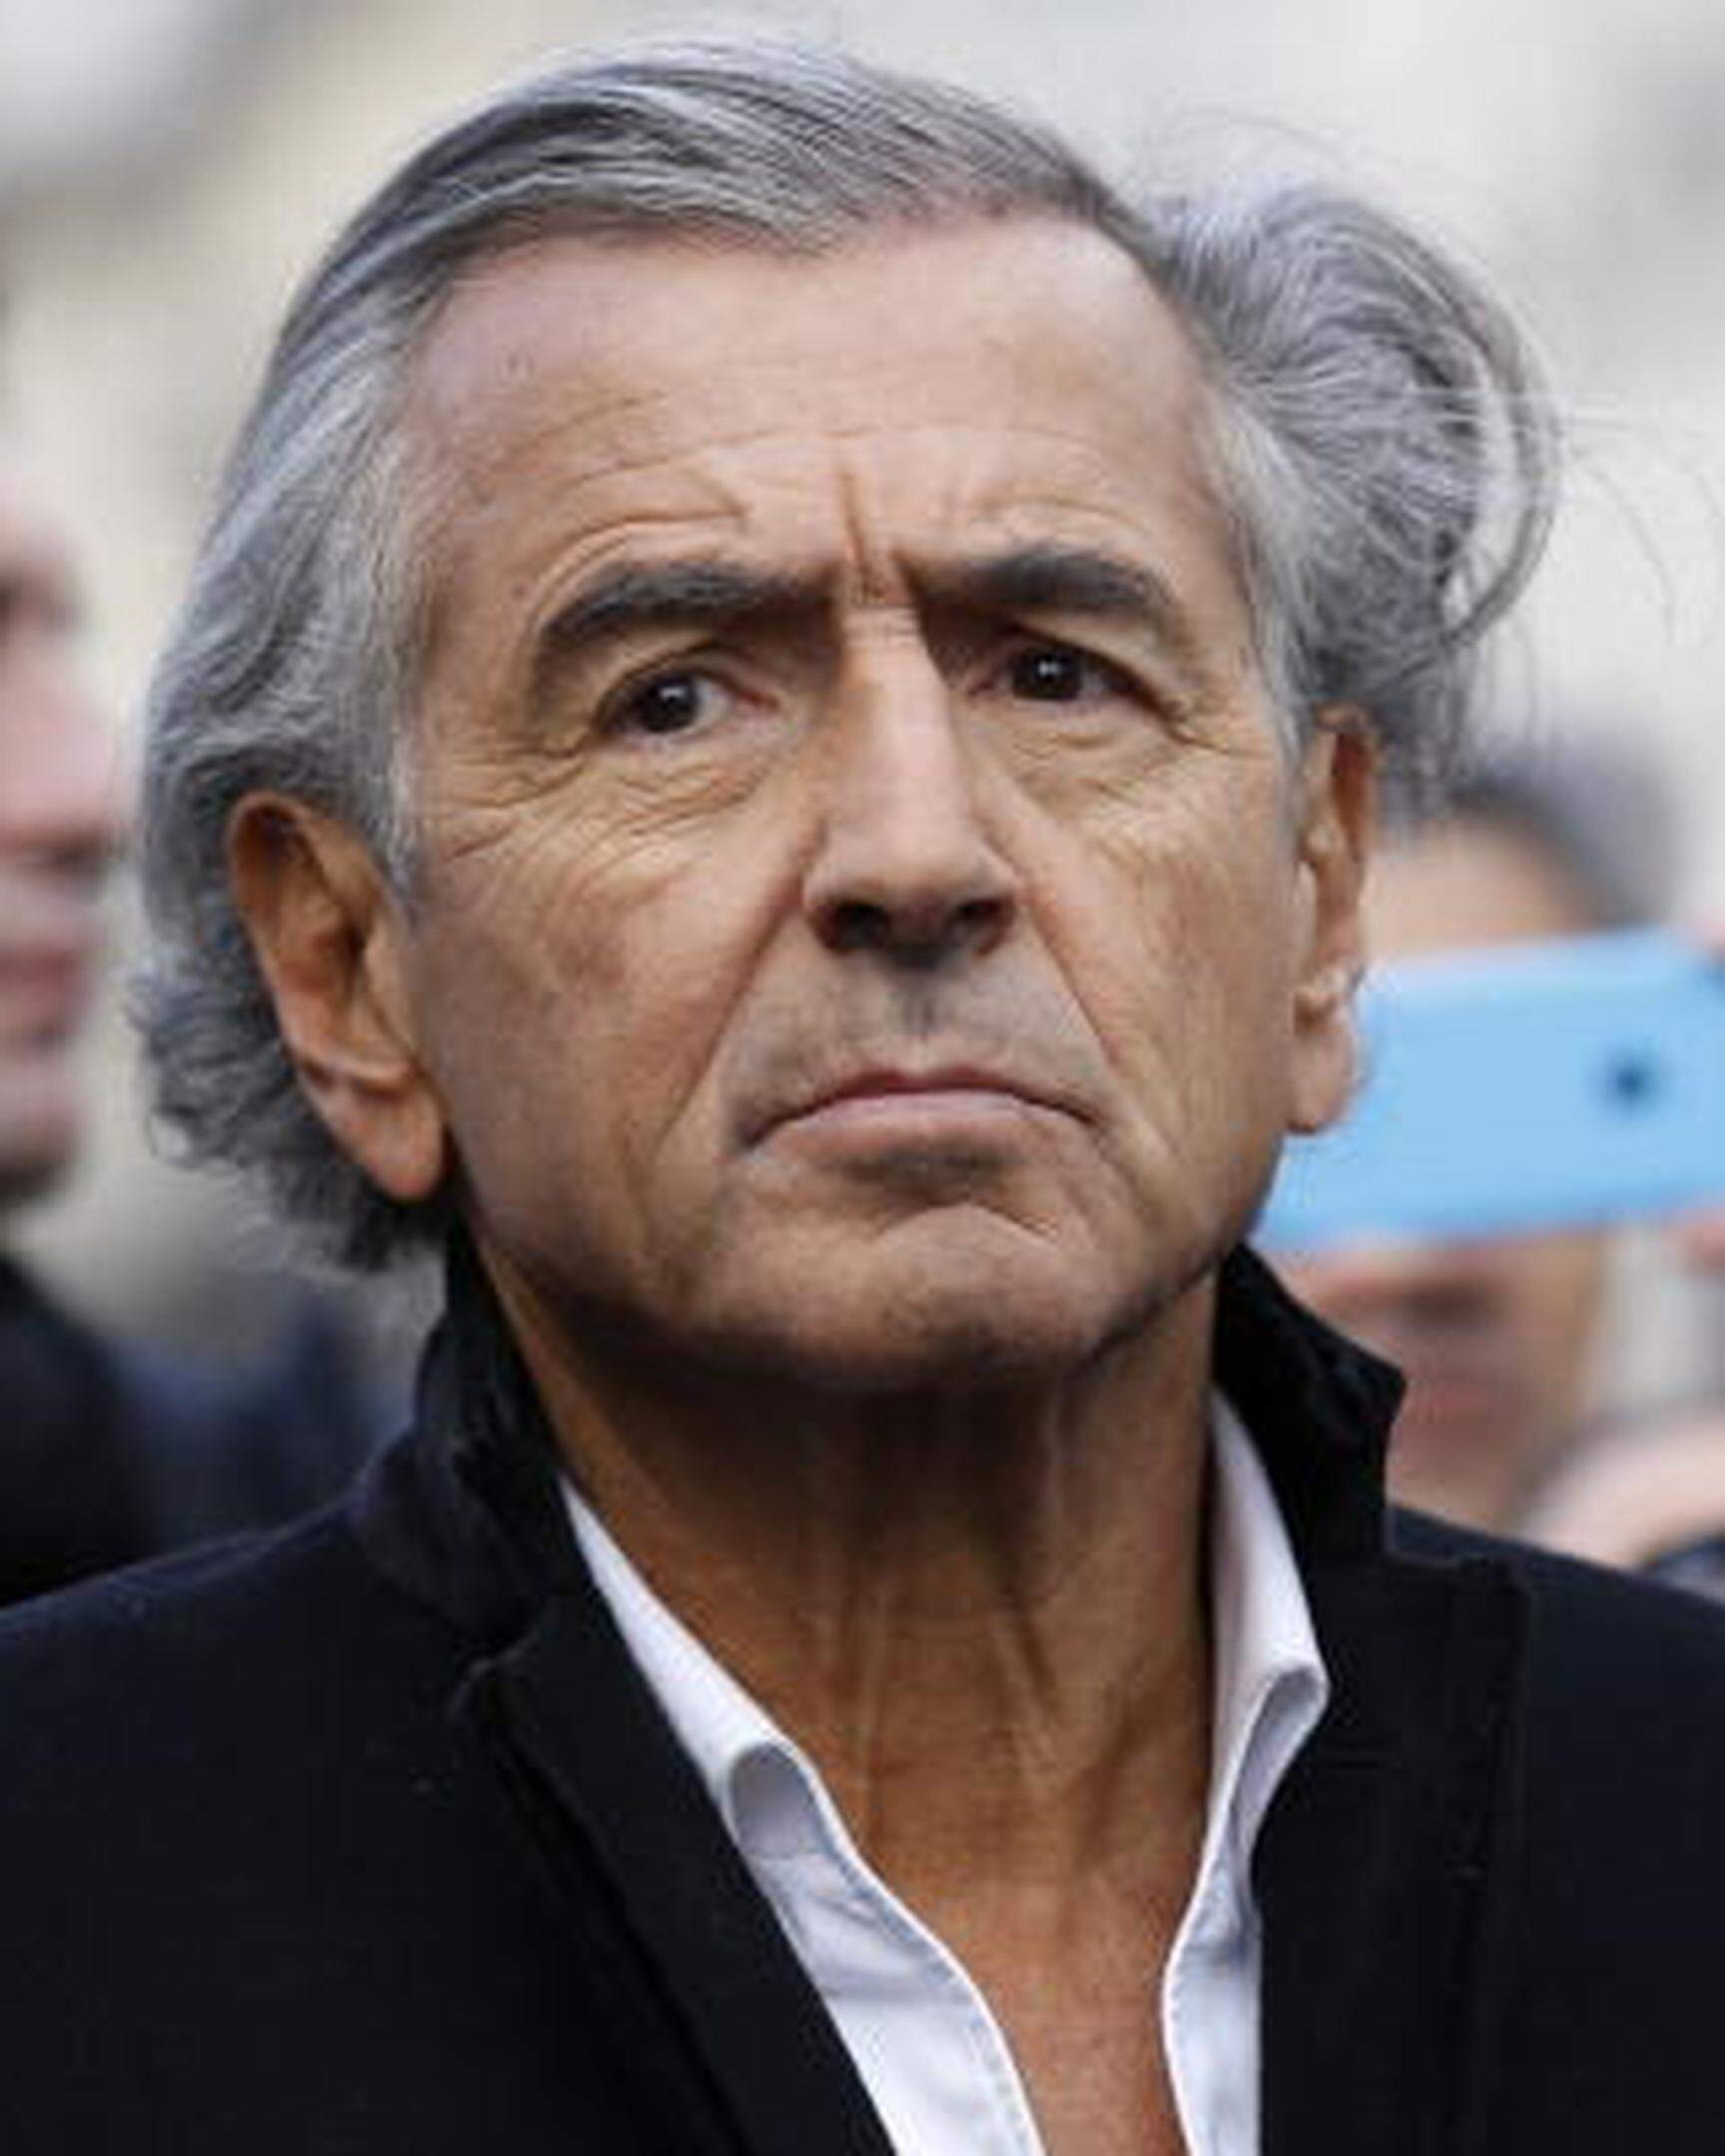 French writer Bernard Henri-Levy stands behind a banner reading "Nous sommes Charlie" (We are Charlie) before the start of a Unity rally Marche Republicaine on January 11, 2015 in Paris in tribute to the 17 victims of a three-day killing spree by homegrown Islamists. The killings began on January 7 with an assault on the Charlie Hebdo satirical magazine in Paris that saw two brothers massacre 12 people including some of the country's best-known cartoonists, the killing of a policewoman and the storming of a Jewish supermarket on the eastern fringes of the capital which killed 4 local residents.        AFP PHOTO / THOMAS SAMSON